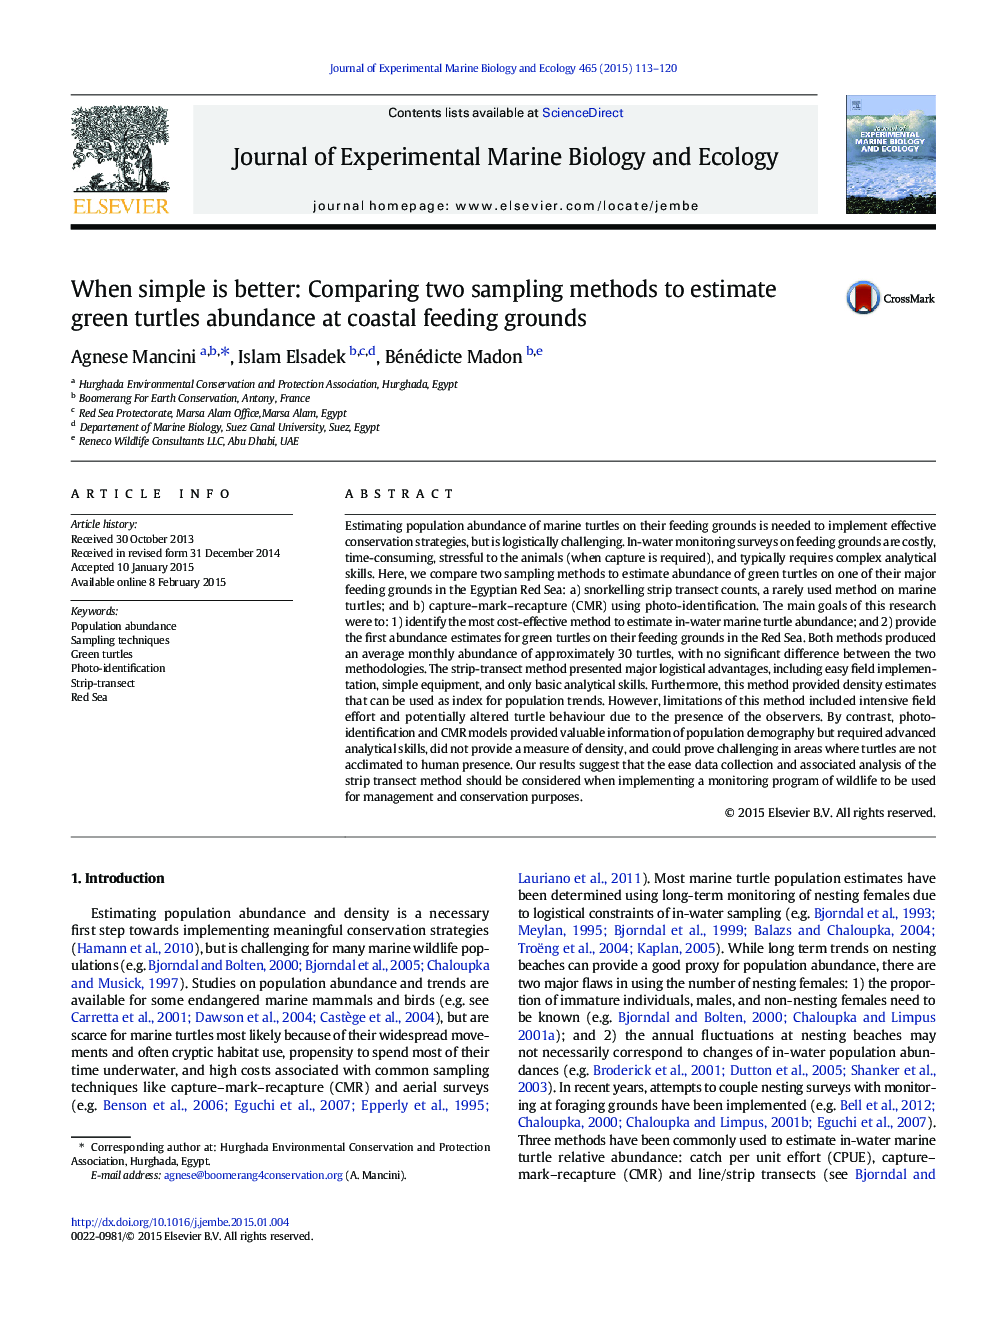 When simple is better: Comparing two sampling methods to estimate green turtles abundance at coastal feeding grounds